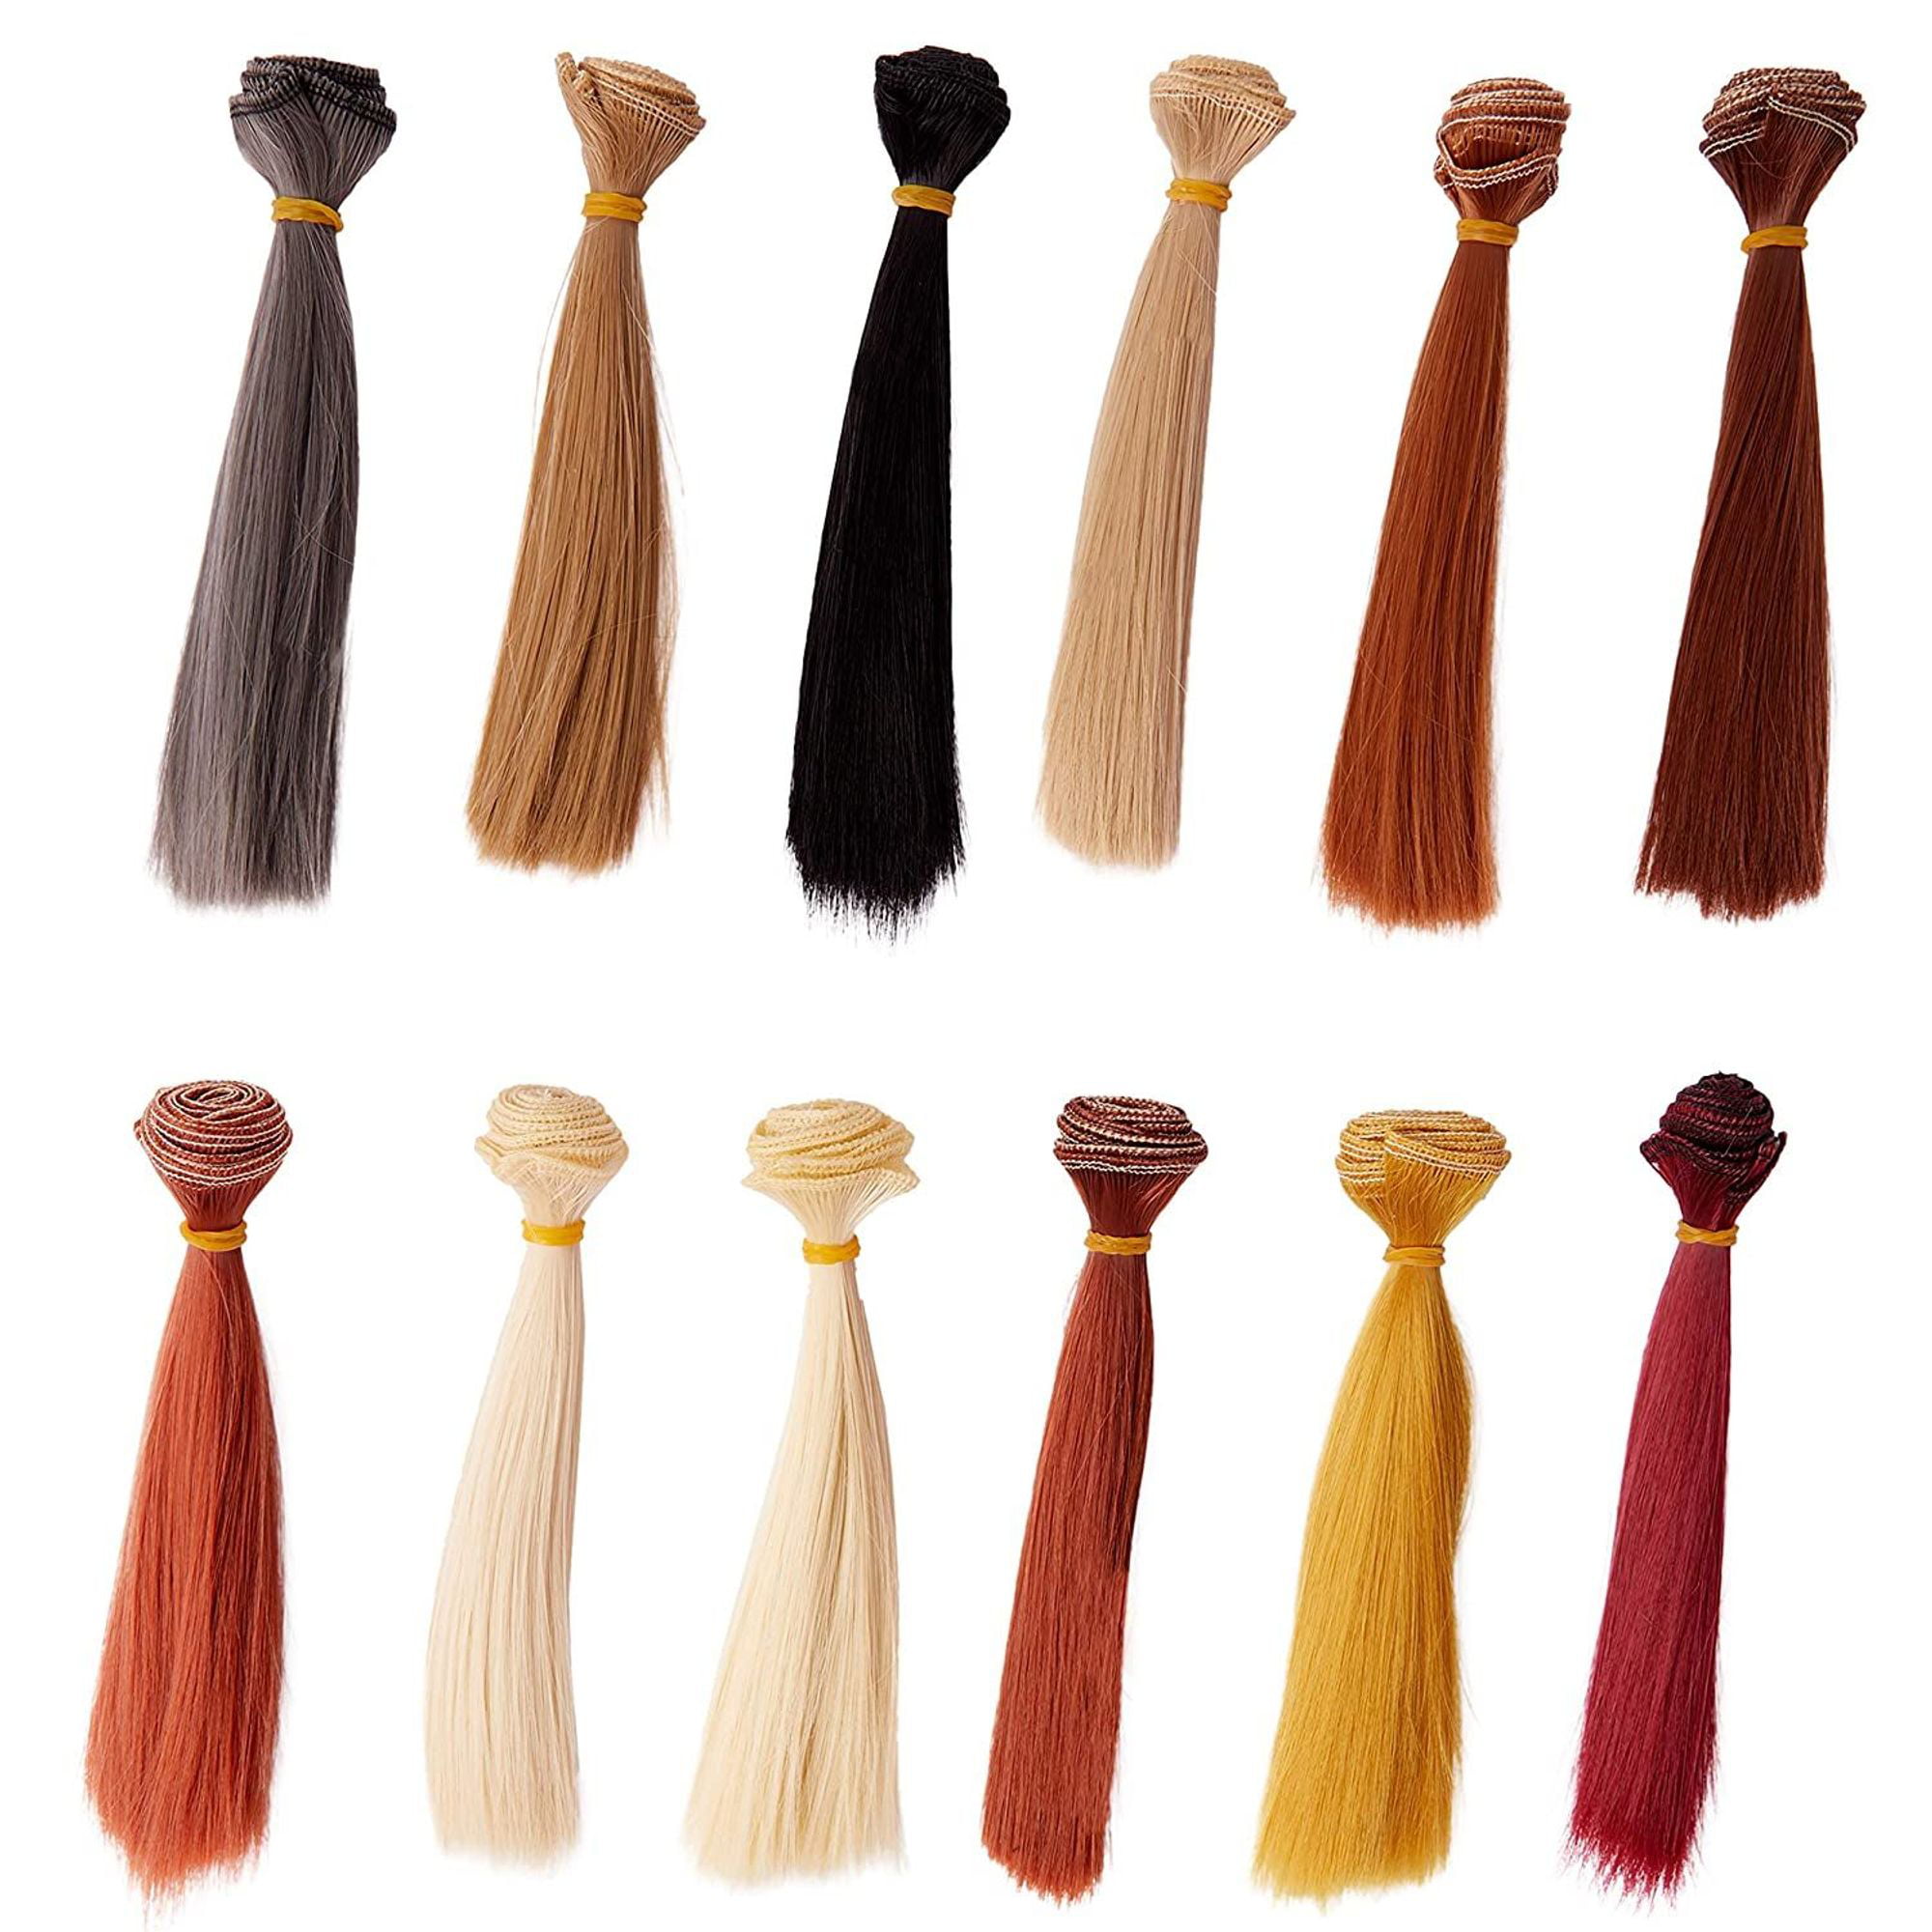 12 Colors Bright Creations Doll Making Hair Wefts 24 Pack